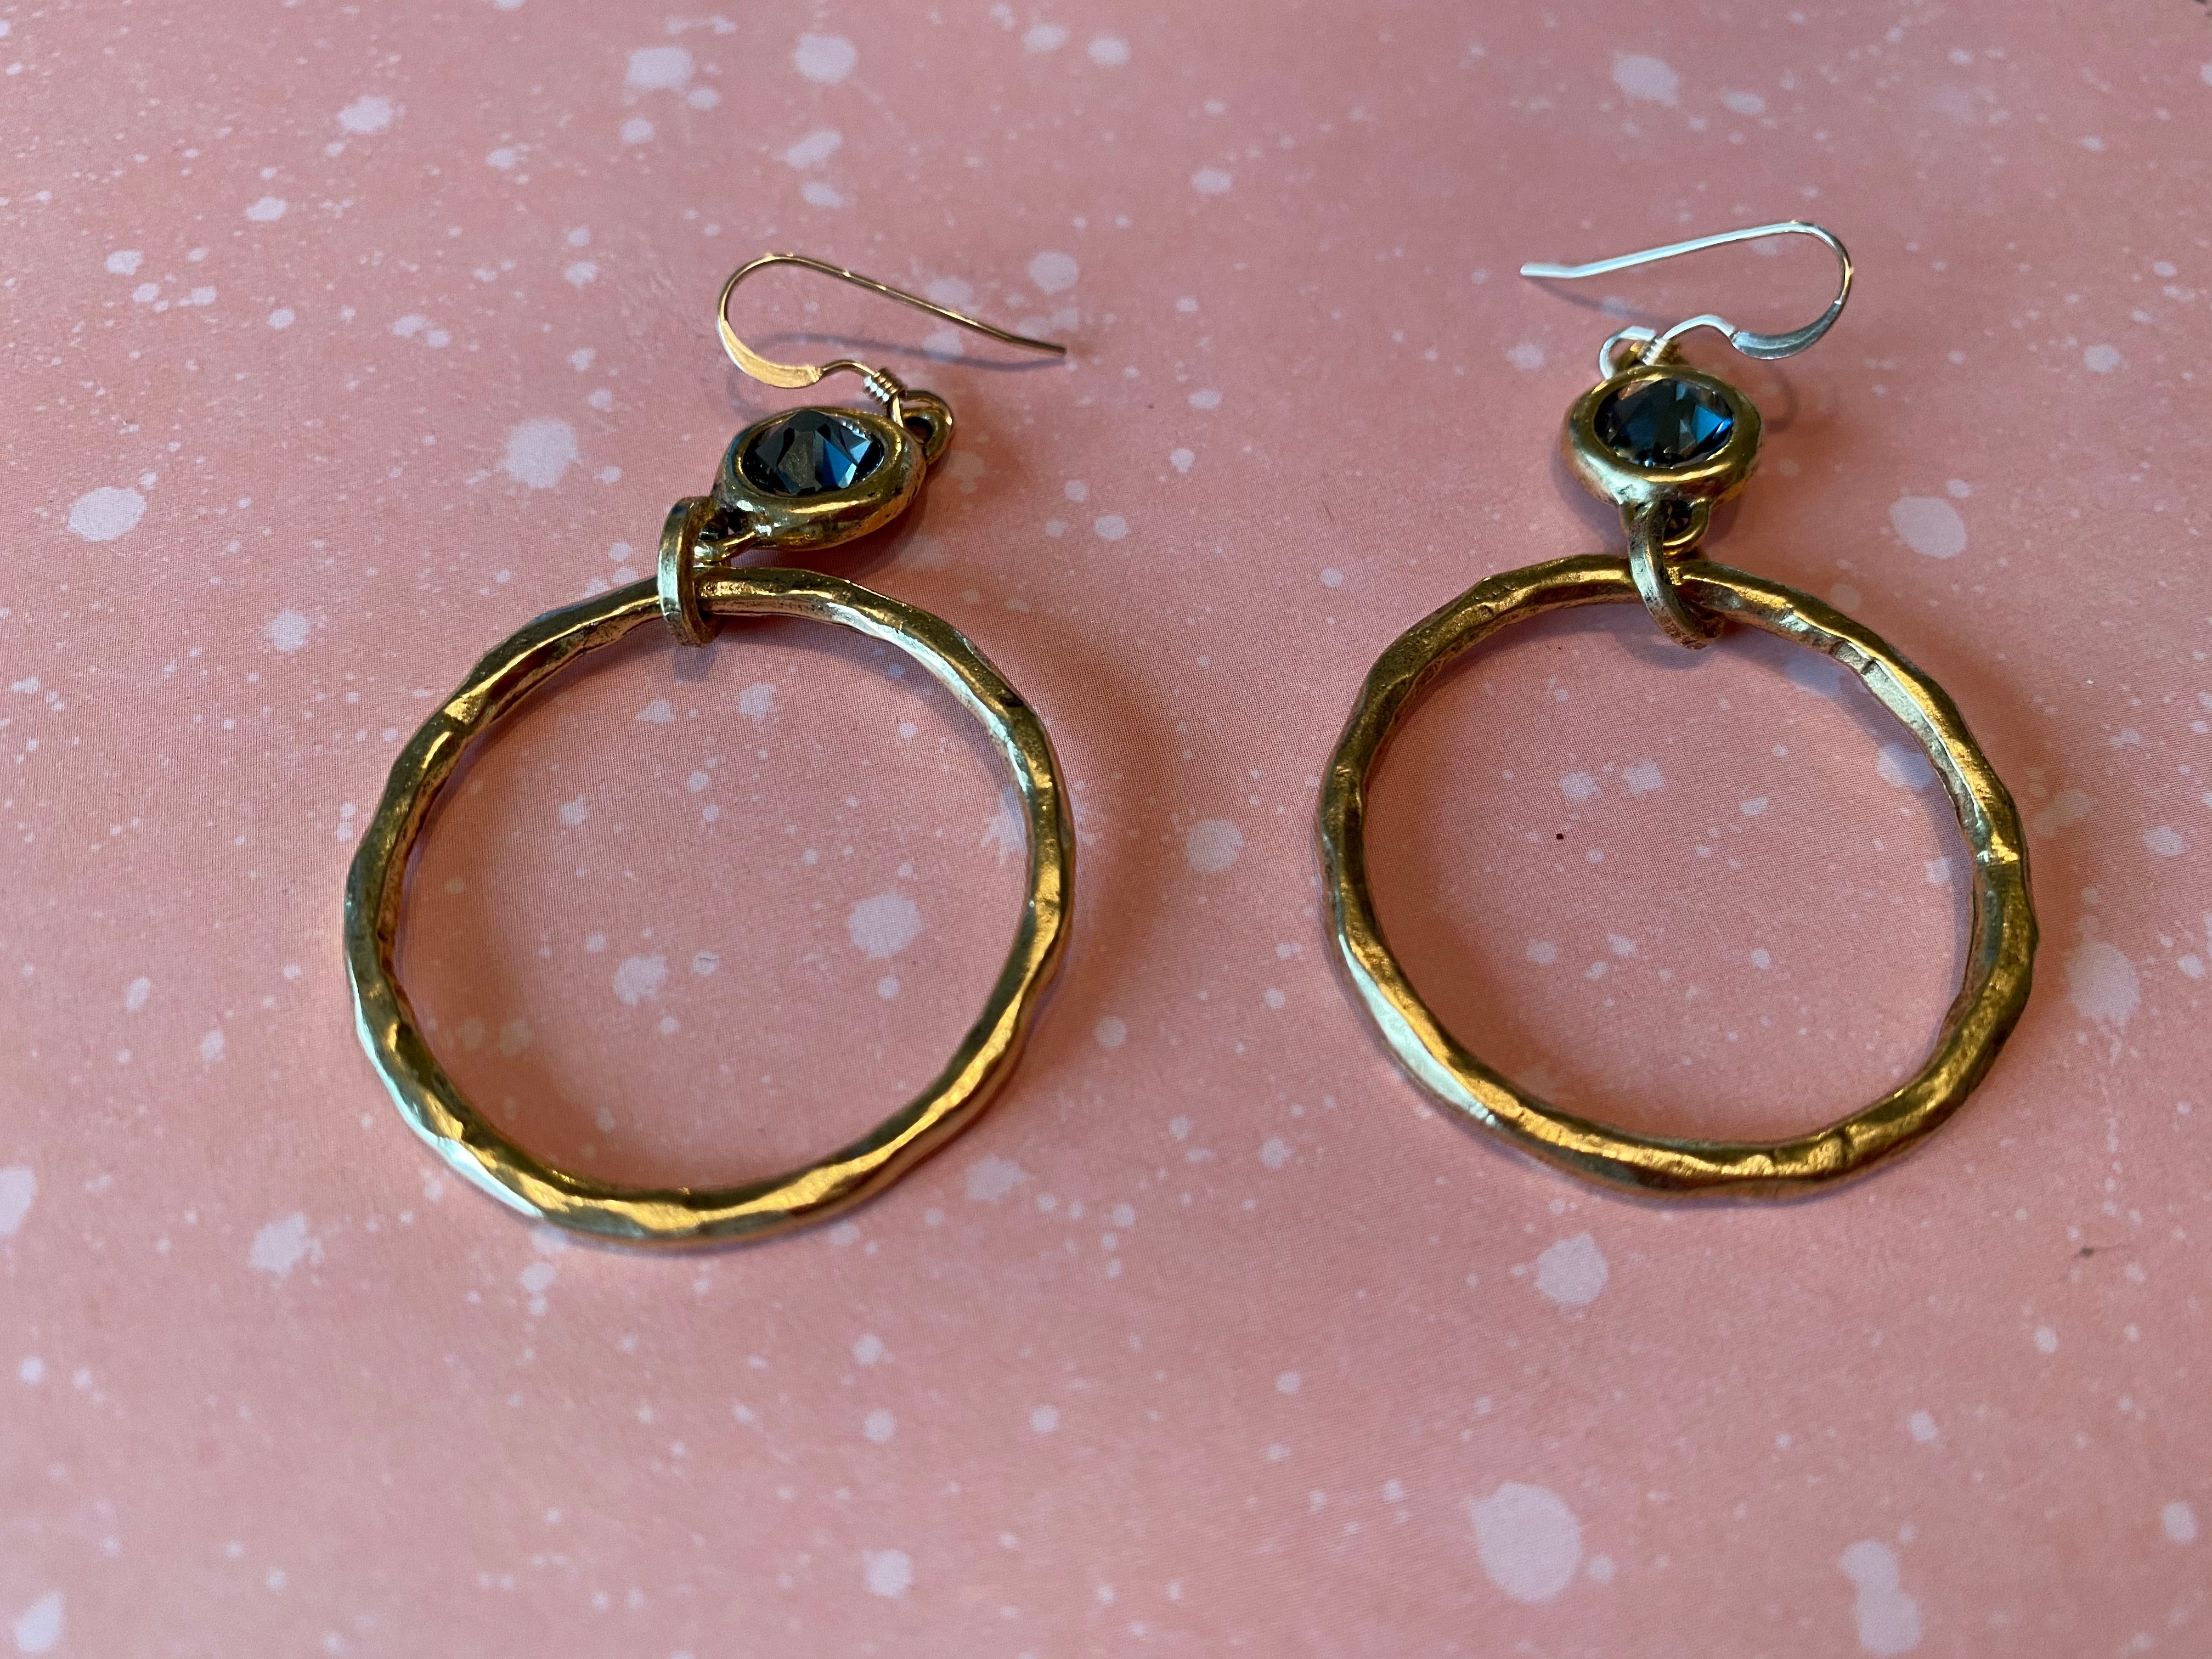 Hammered Gold Hoop Earrings with Crystal